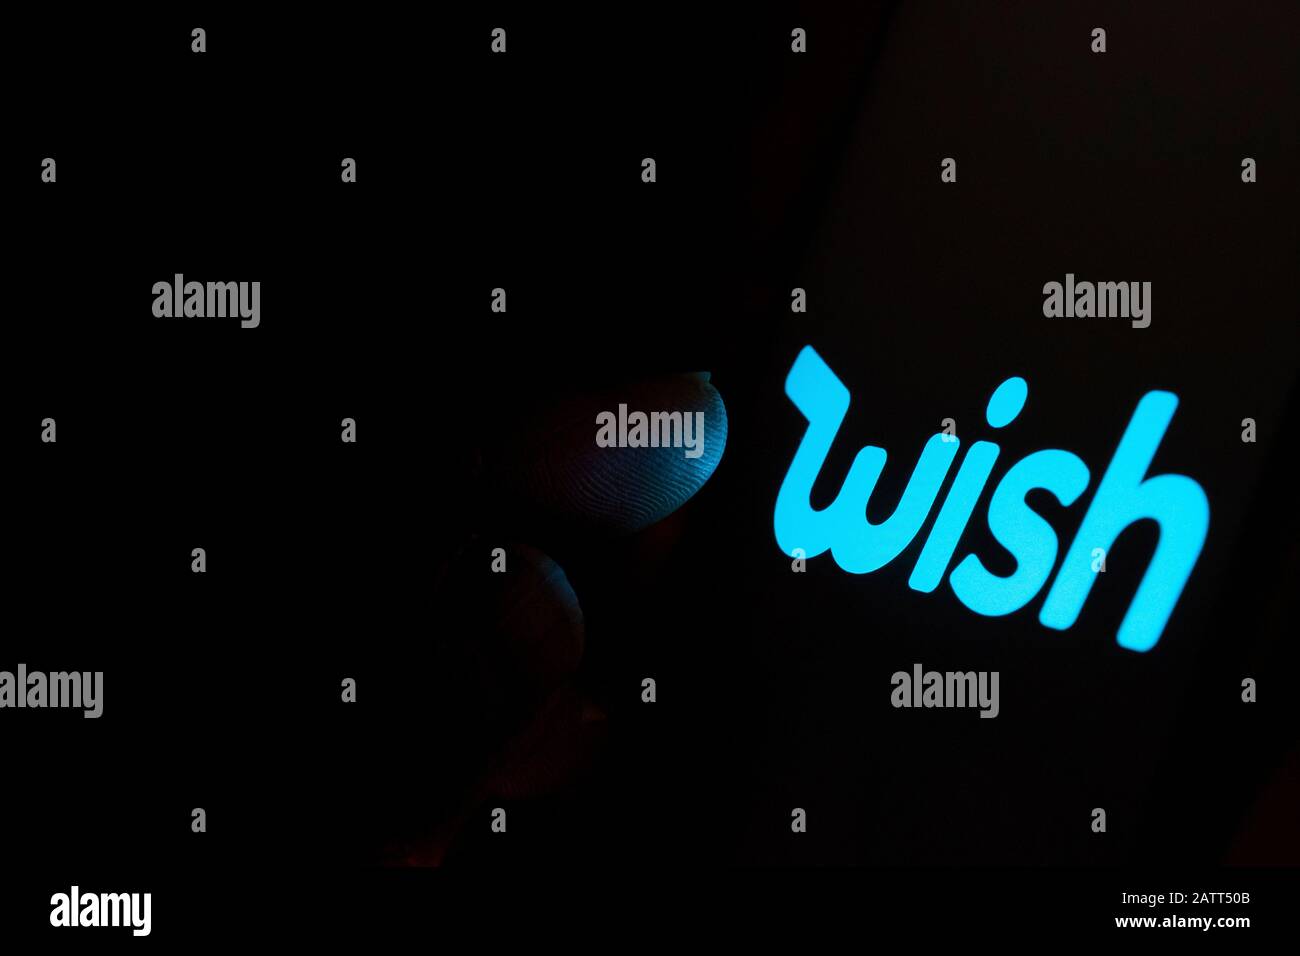 Wish trading platform logo on the screen and finger pointing at it. Concept photo. Stock Photo